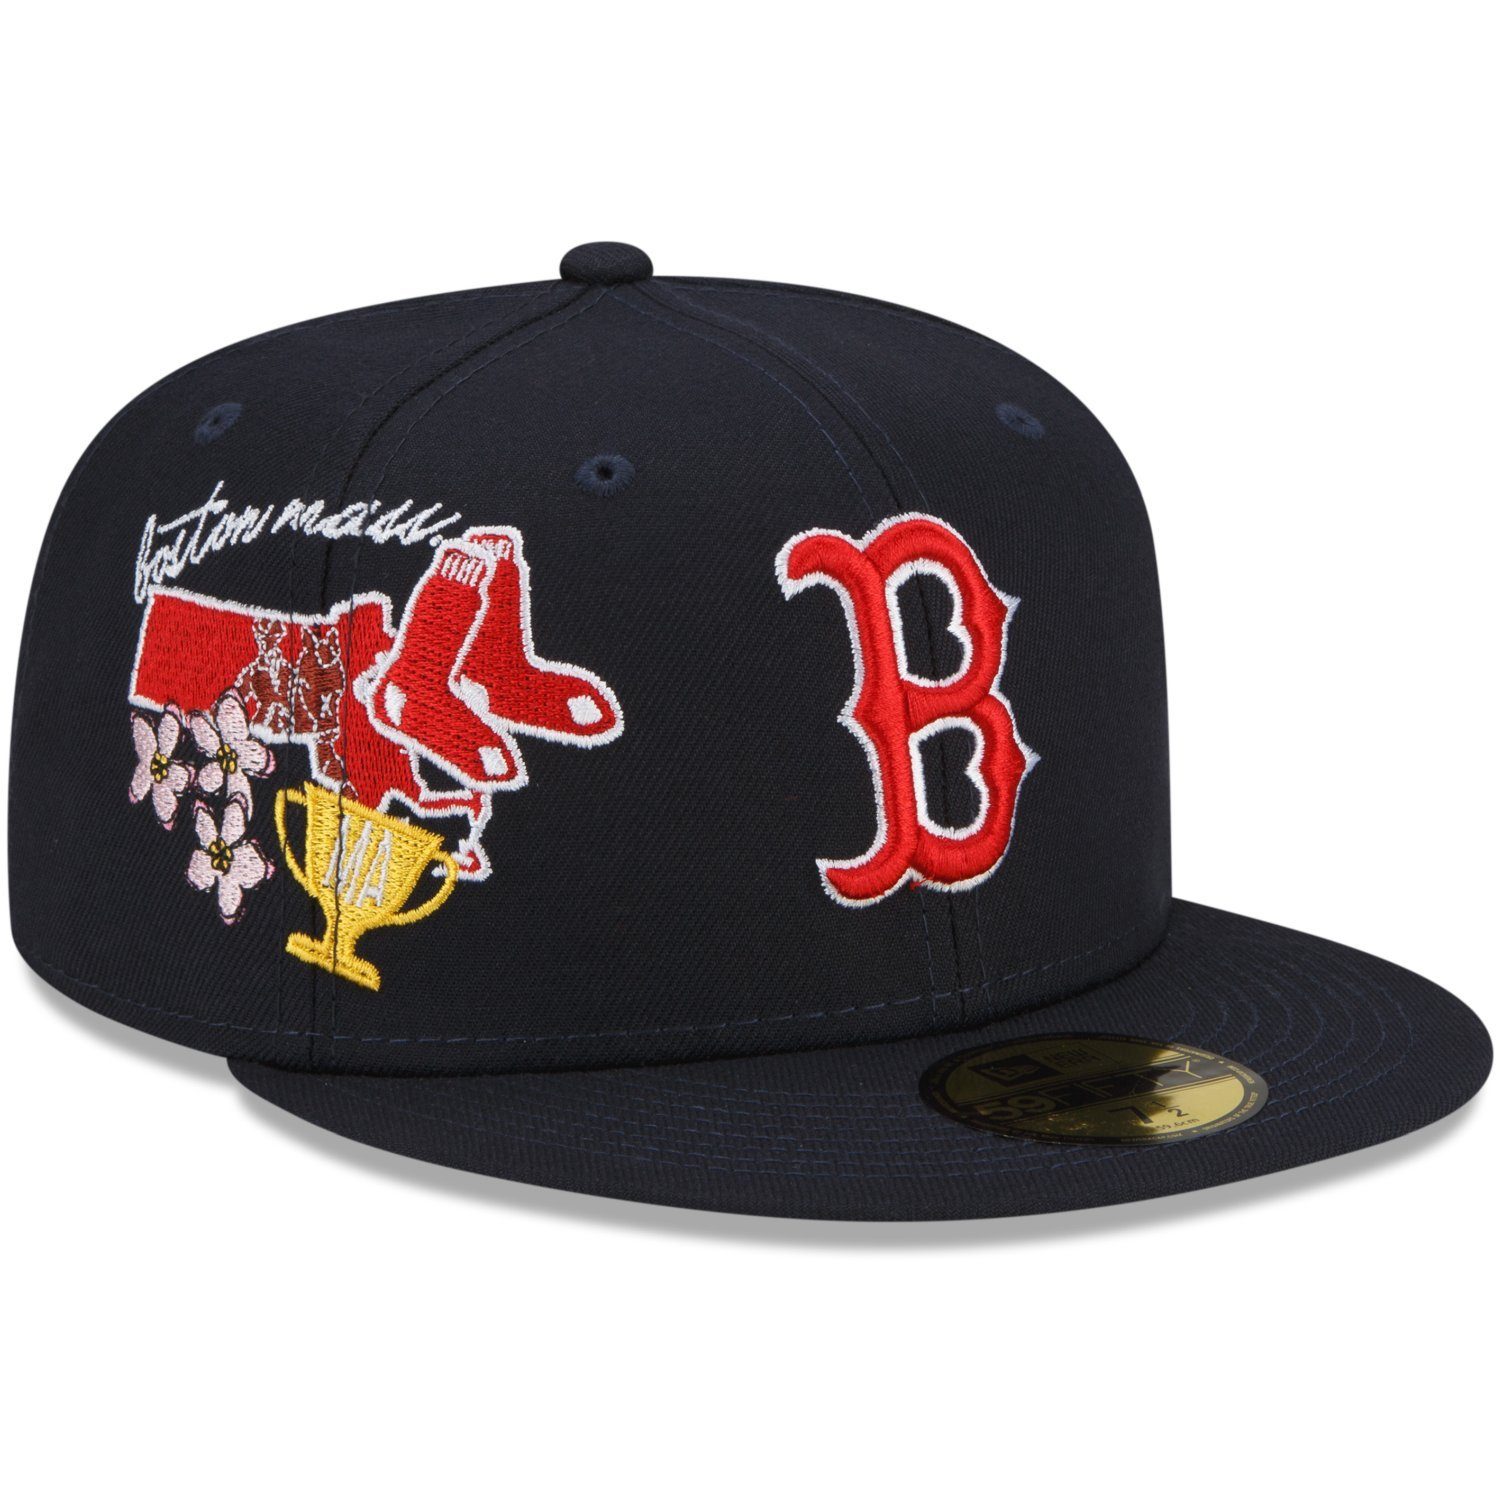 New Era Fitted Cap 59Fifty CITY CLUSTER Boston Red Sox | Fitted Caps